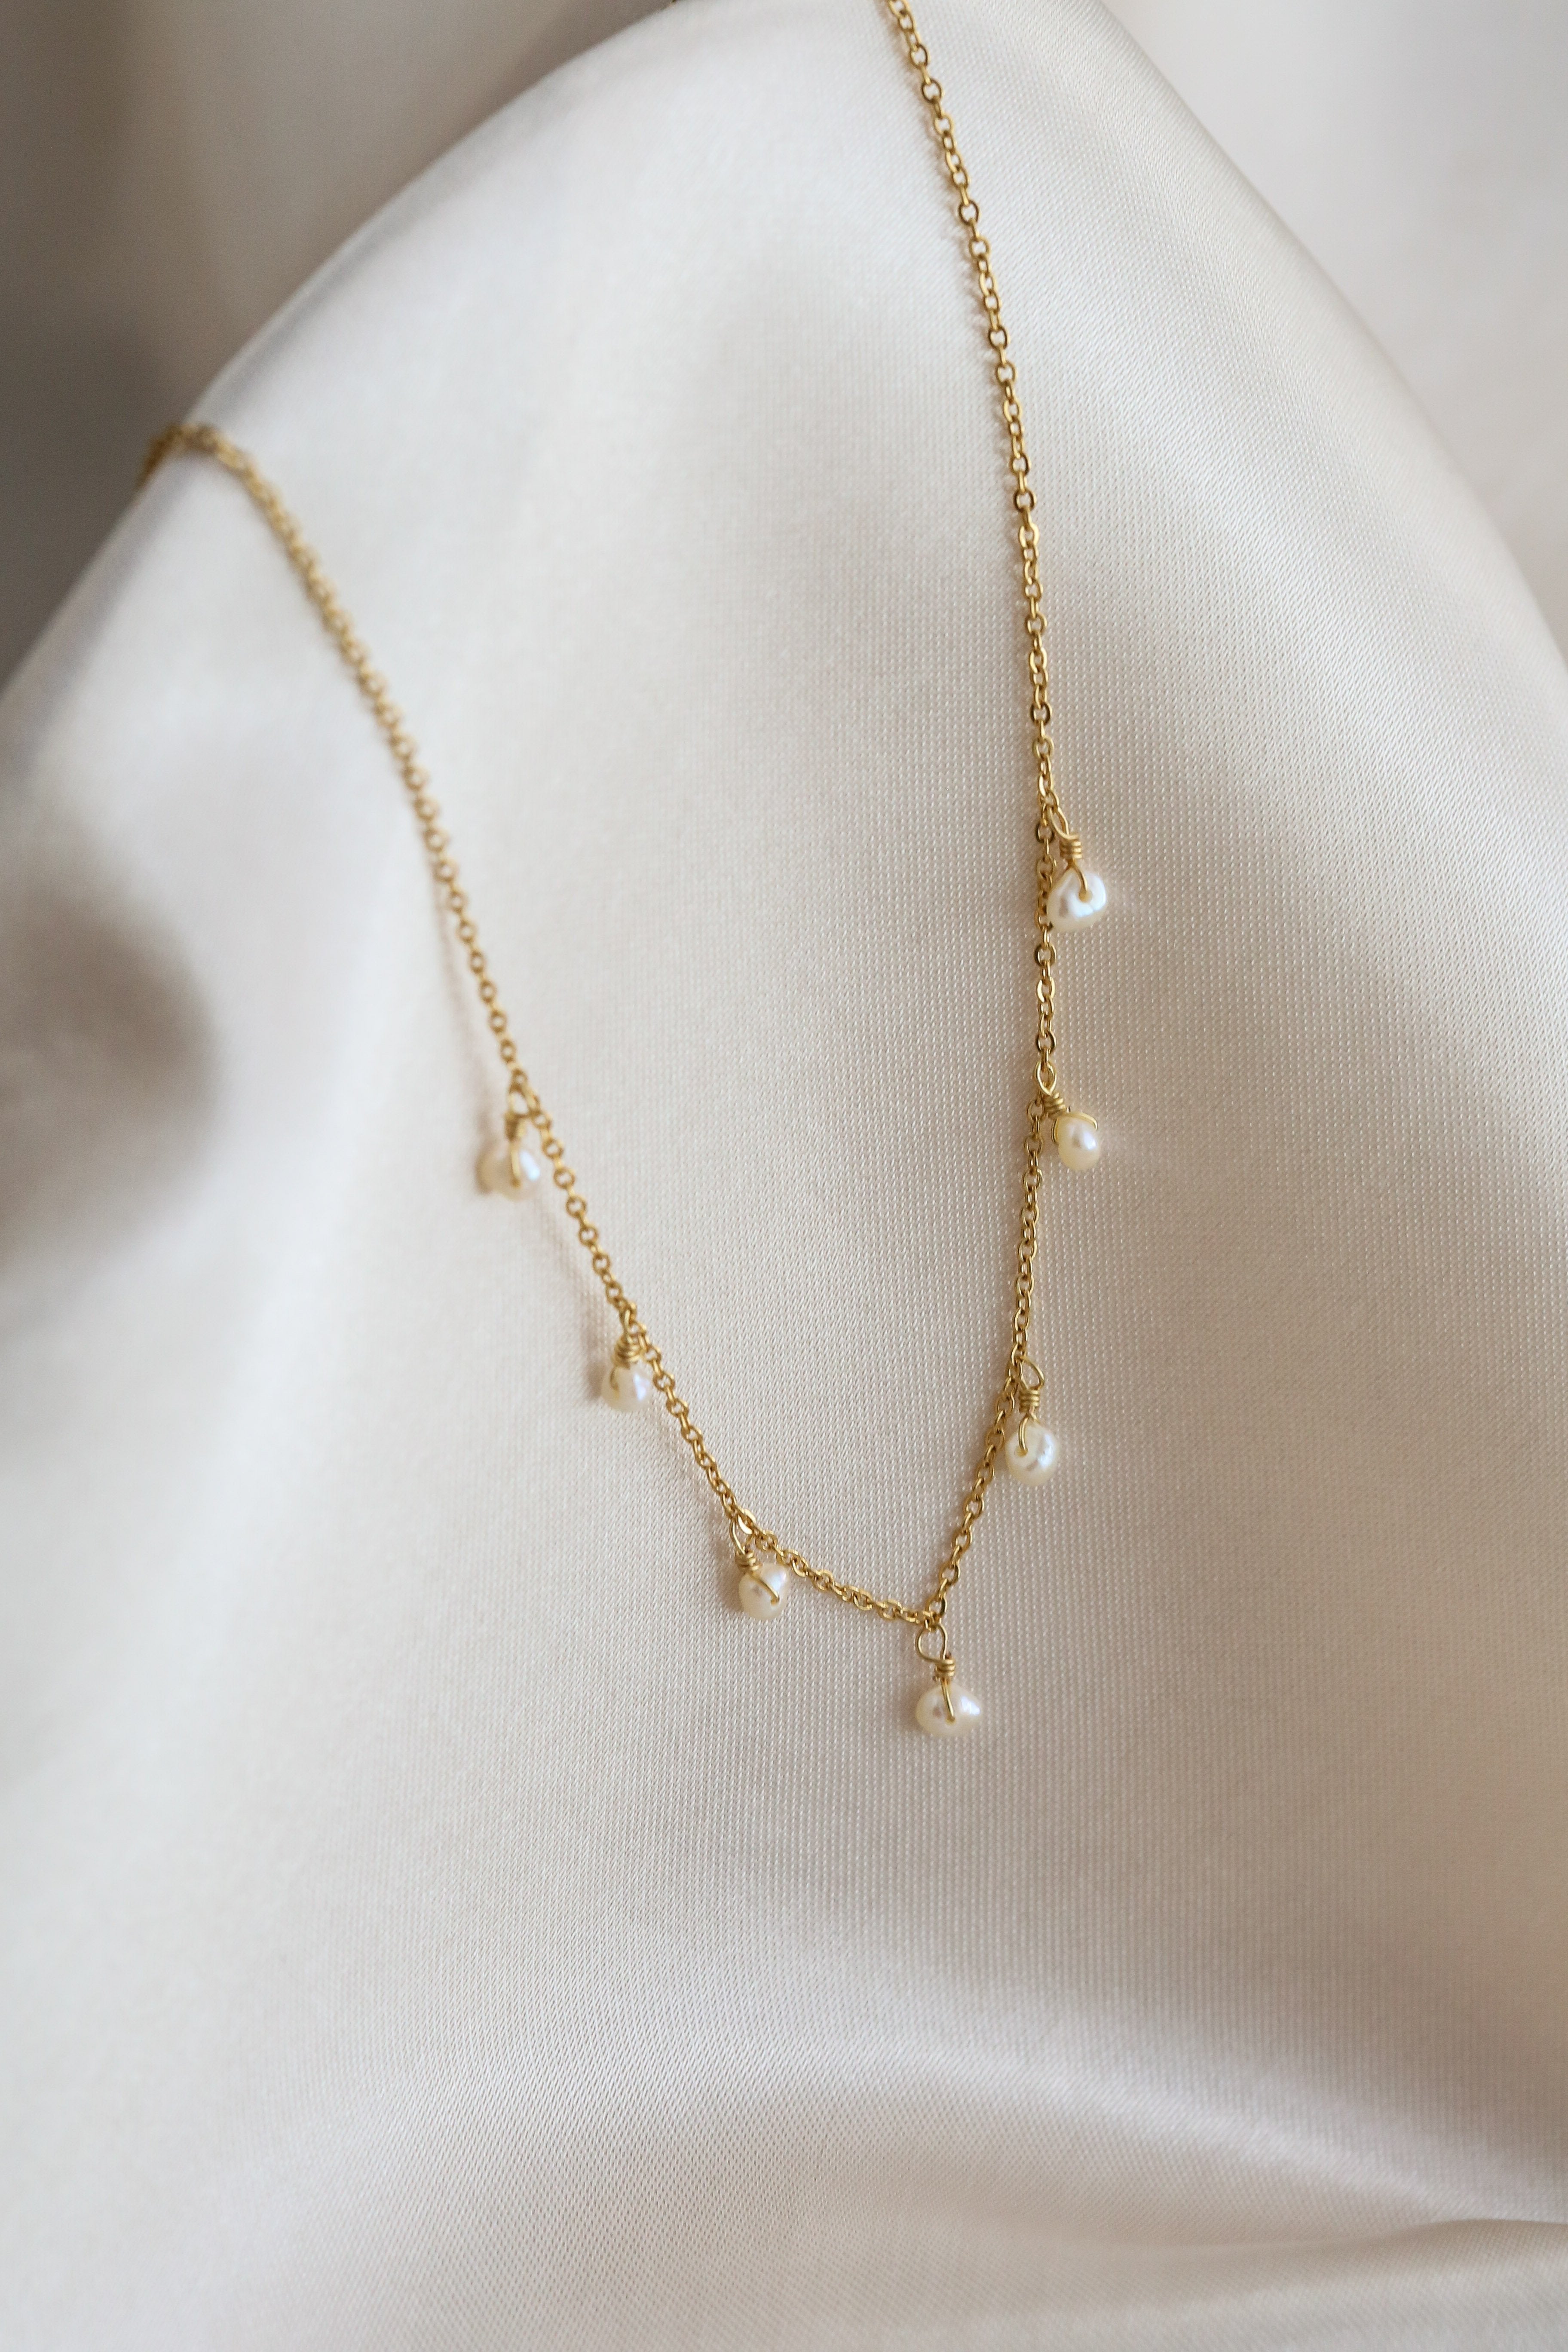 Sicilia Necklace - Boutique Minimaliste has waterproof, durable, elegant and vintage inspired jewelry